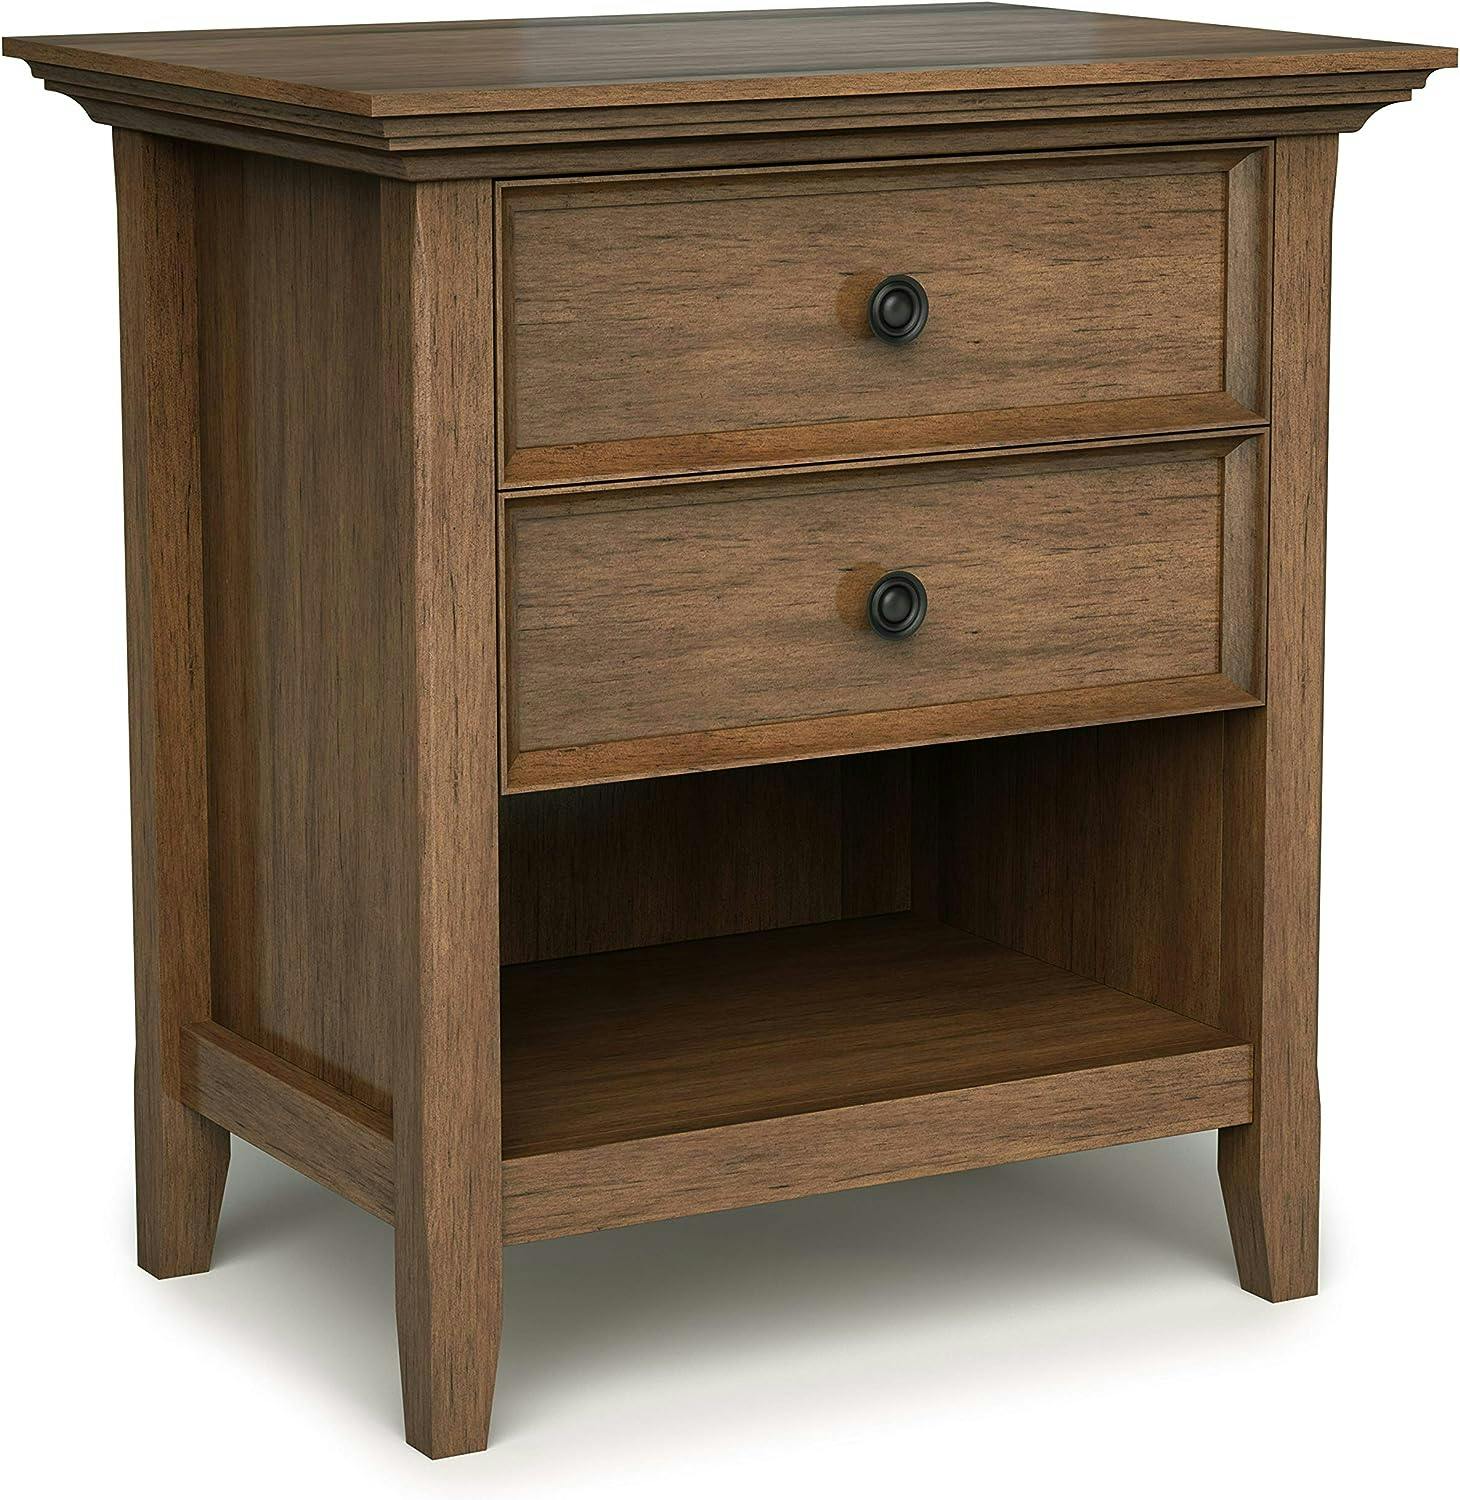 Amherst Rustic Natural Aged Brown Solid Wood Bedside Nightstand with 2 Drawers